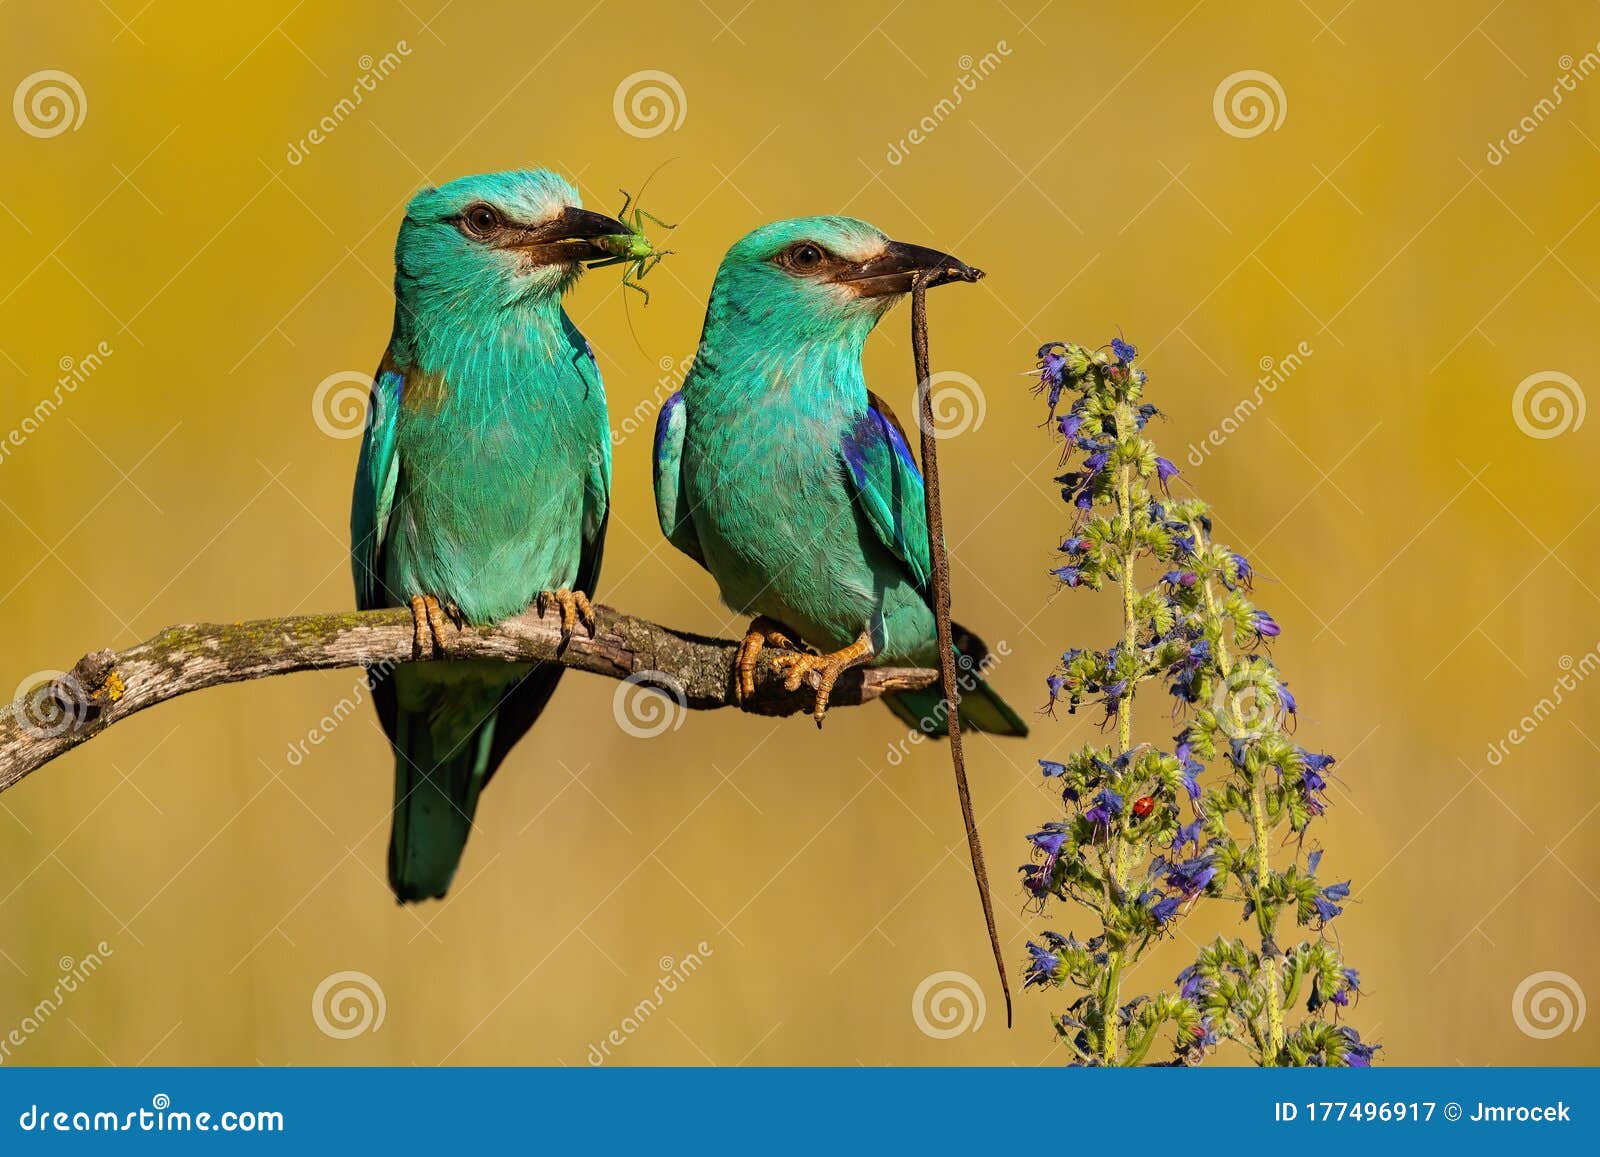 3 147 Cute Pair Birds Photos Free Royalty Free Stock Photos From Dreamstime